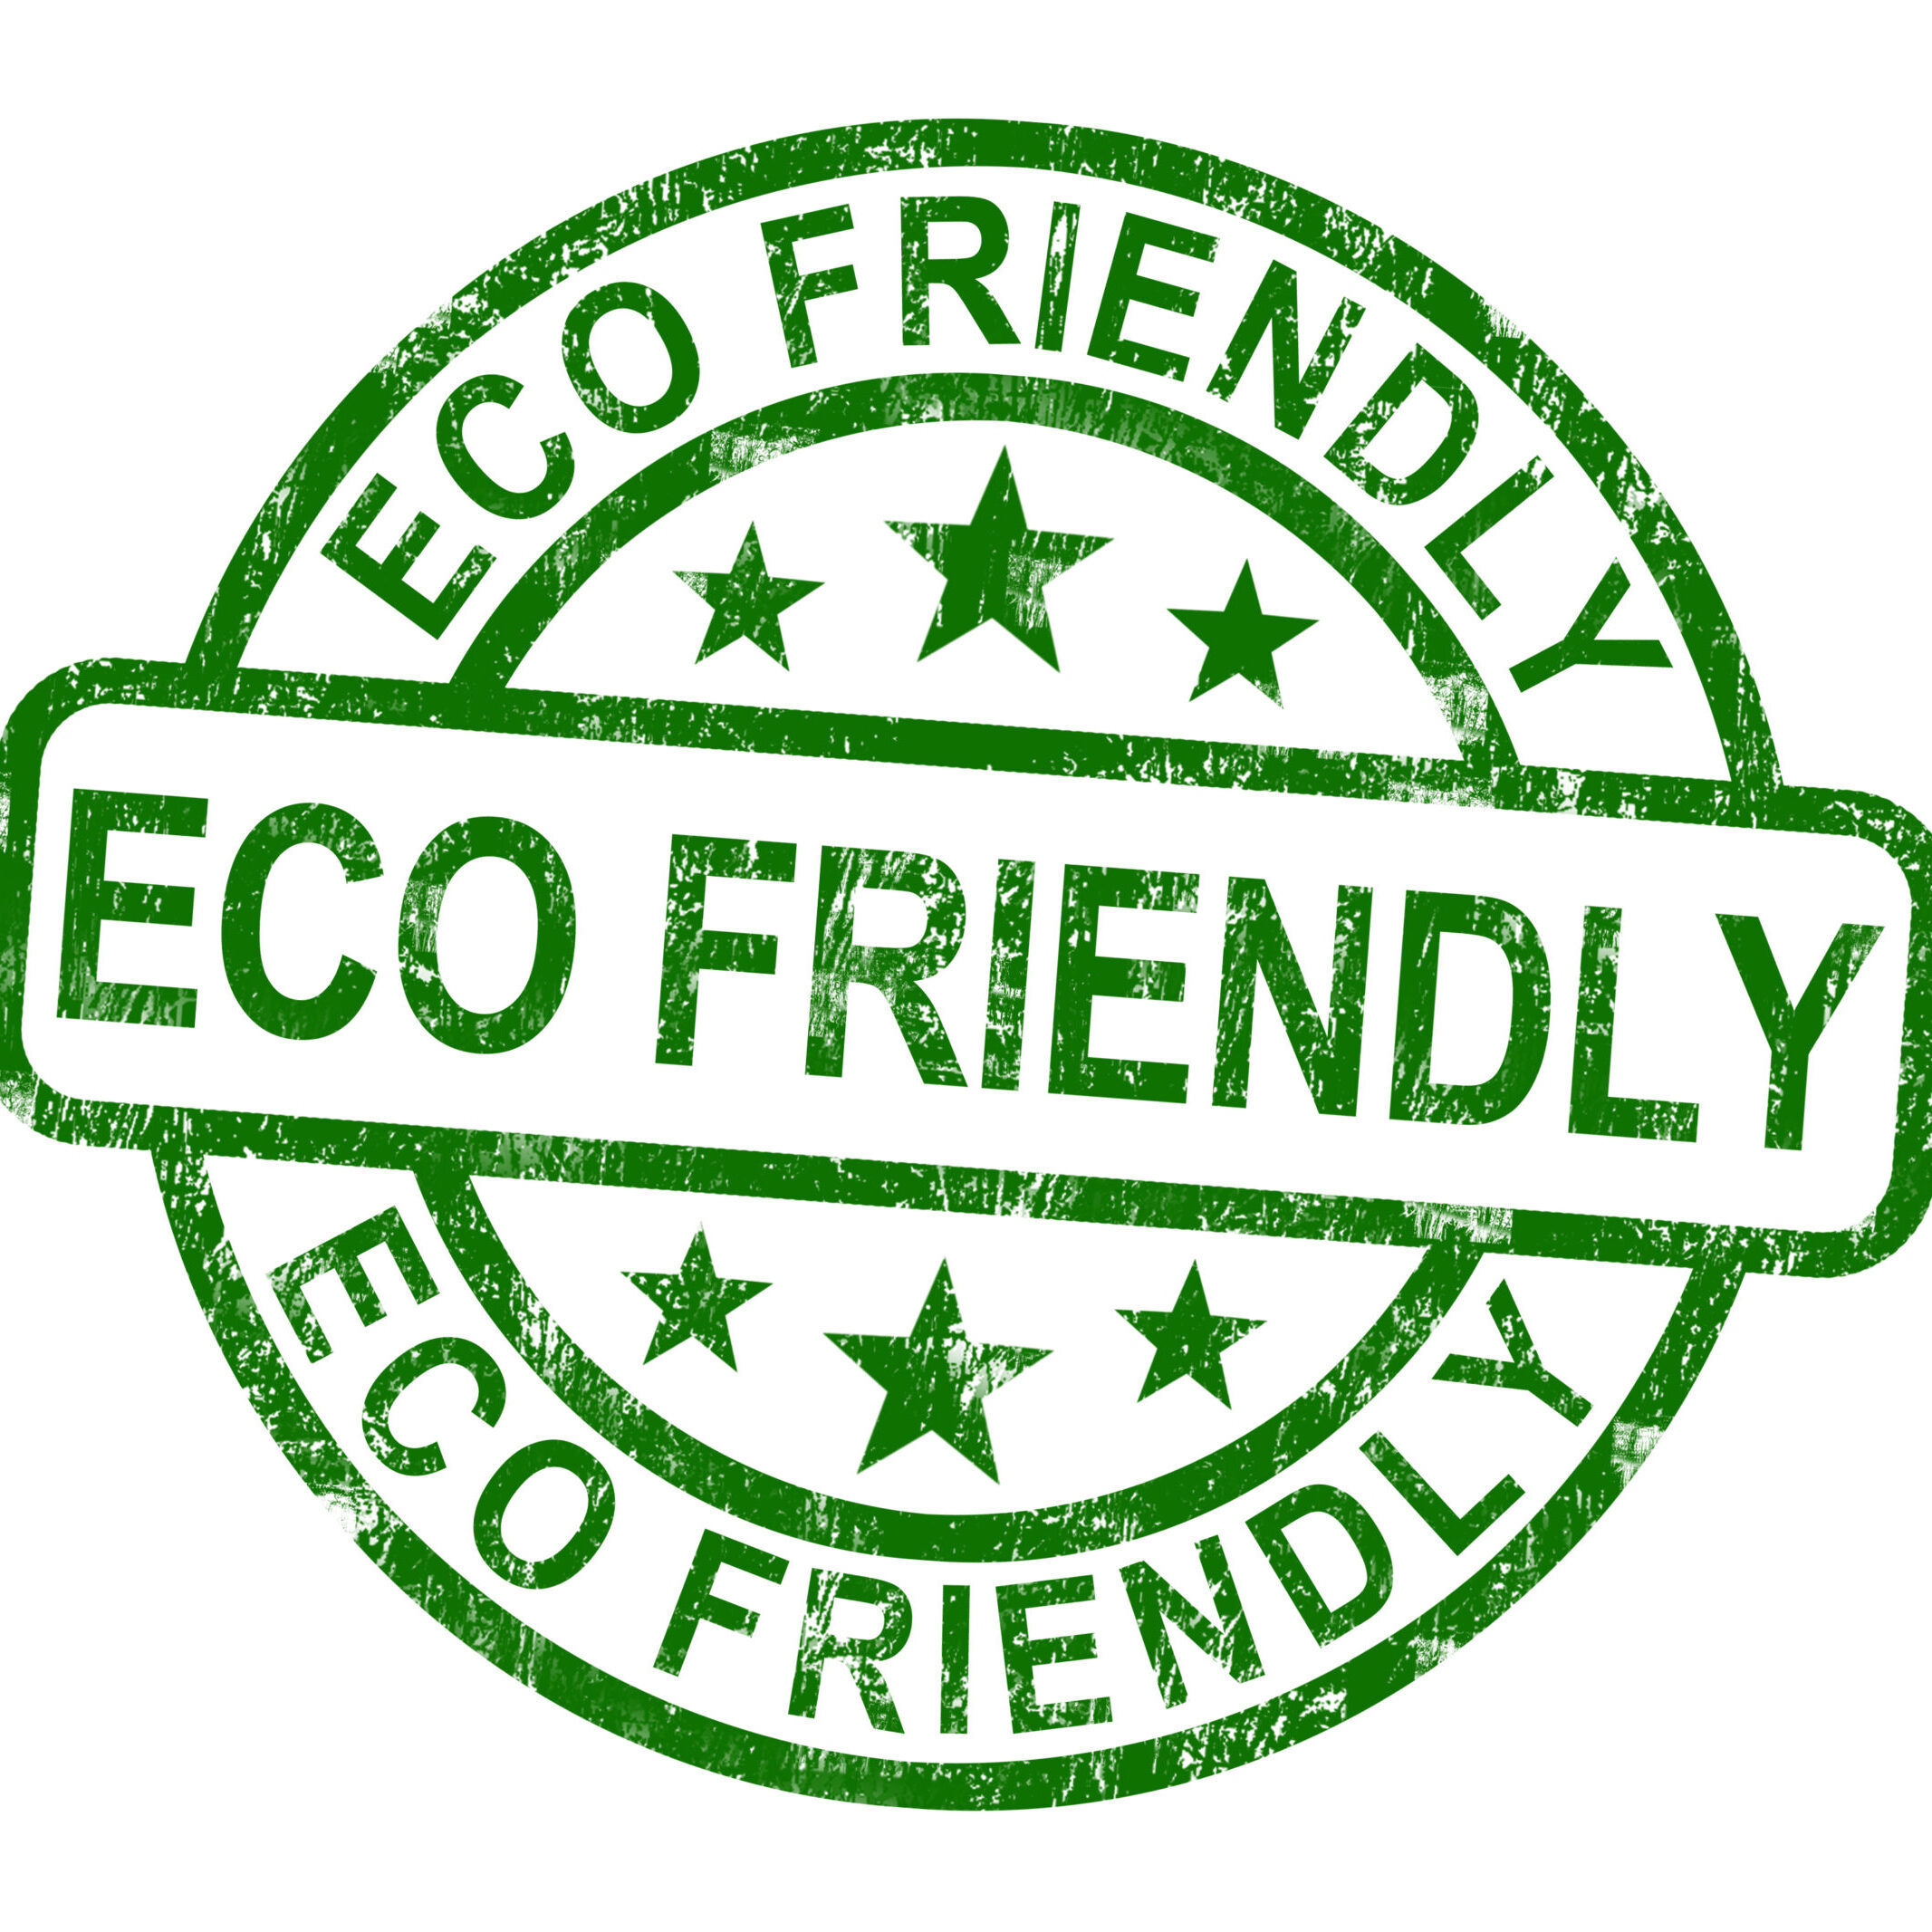 Eco,Friendly,Stamp,As,Symbol,For,Recycling,Or,Nature